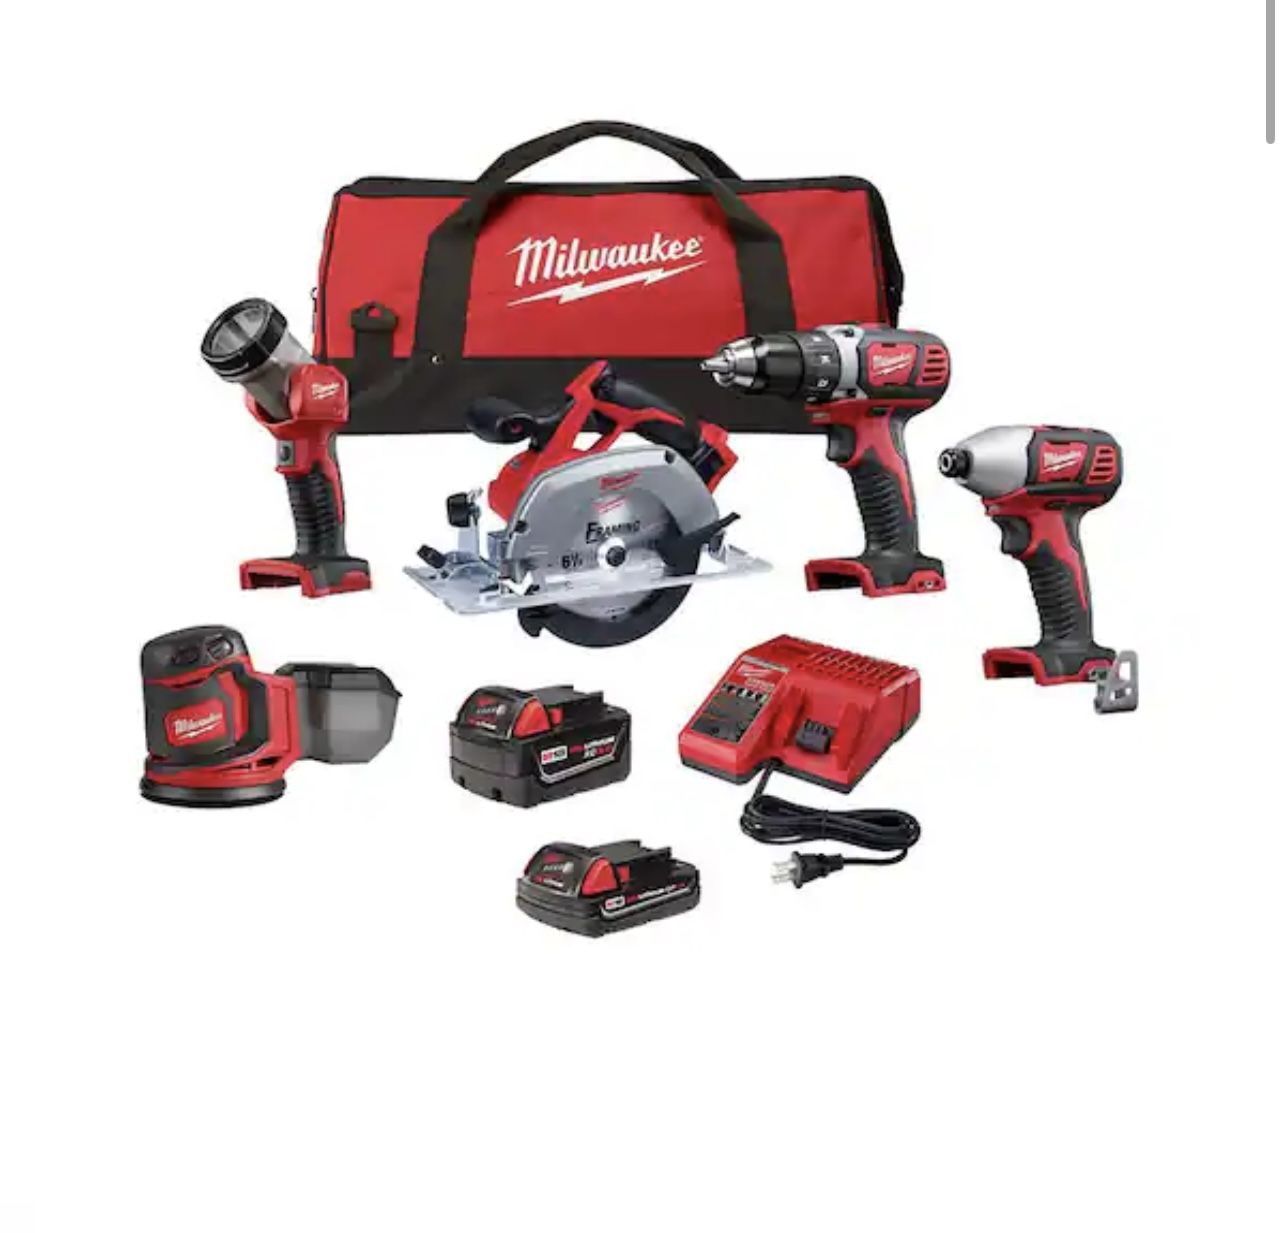 Milwaukee M18 18V Lithium-Ion Cordless Combo-Kit (5-tool) with 2 batteries and charger